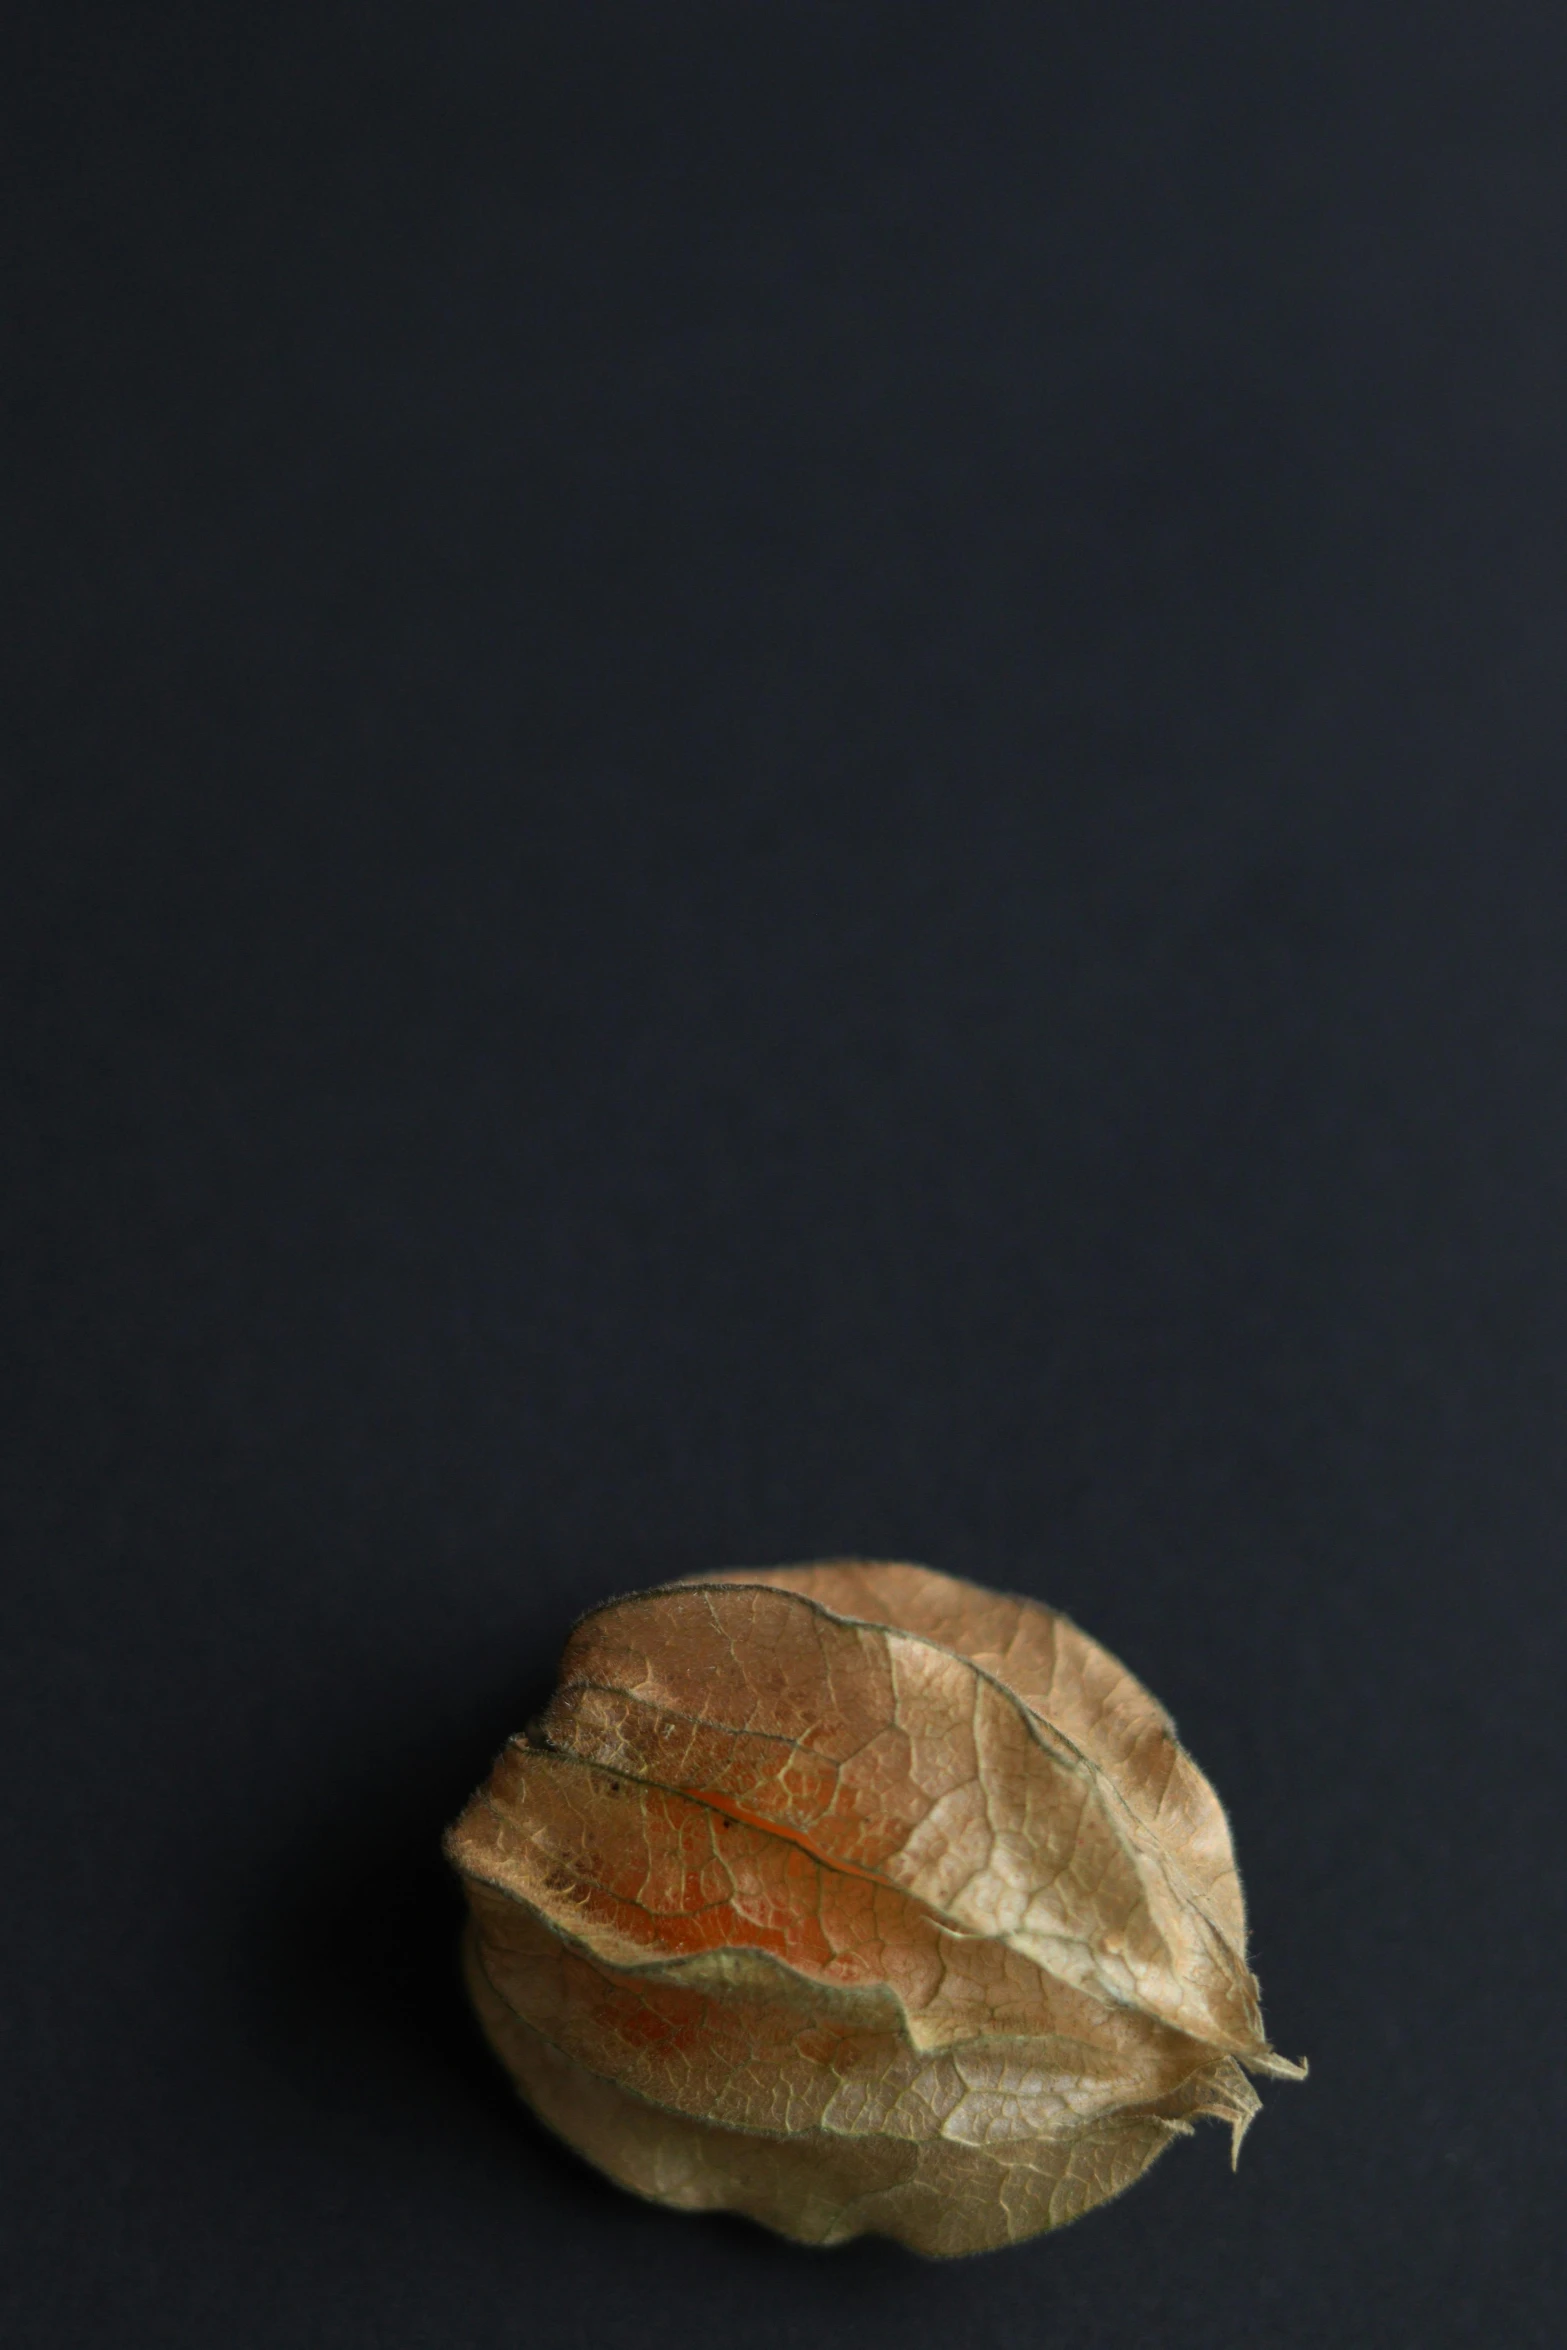 a close up of a fruit on a black surface, by Ruth Collet, conceptual art, lump of native gold, made of leaves, portrait n - 9, red ocher